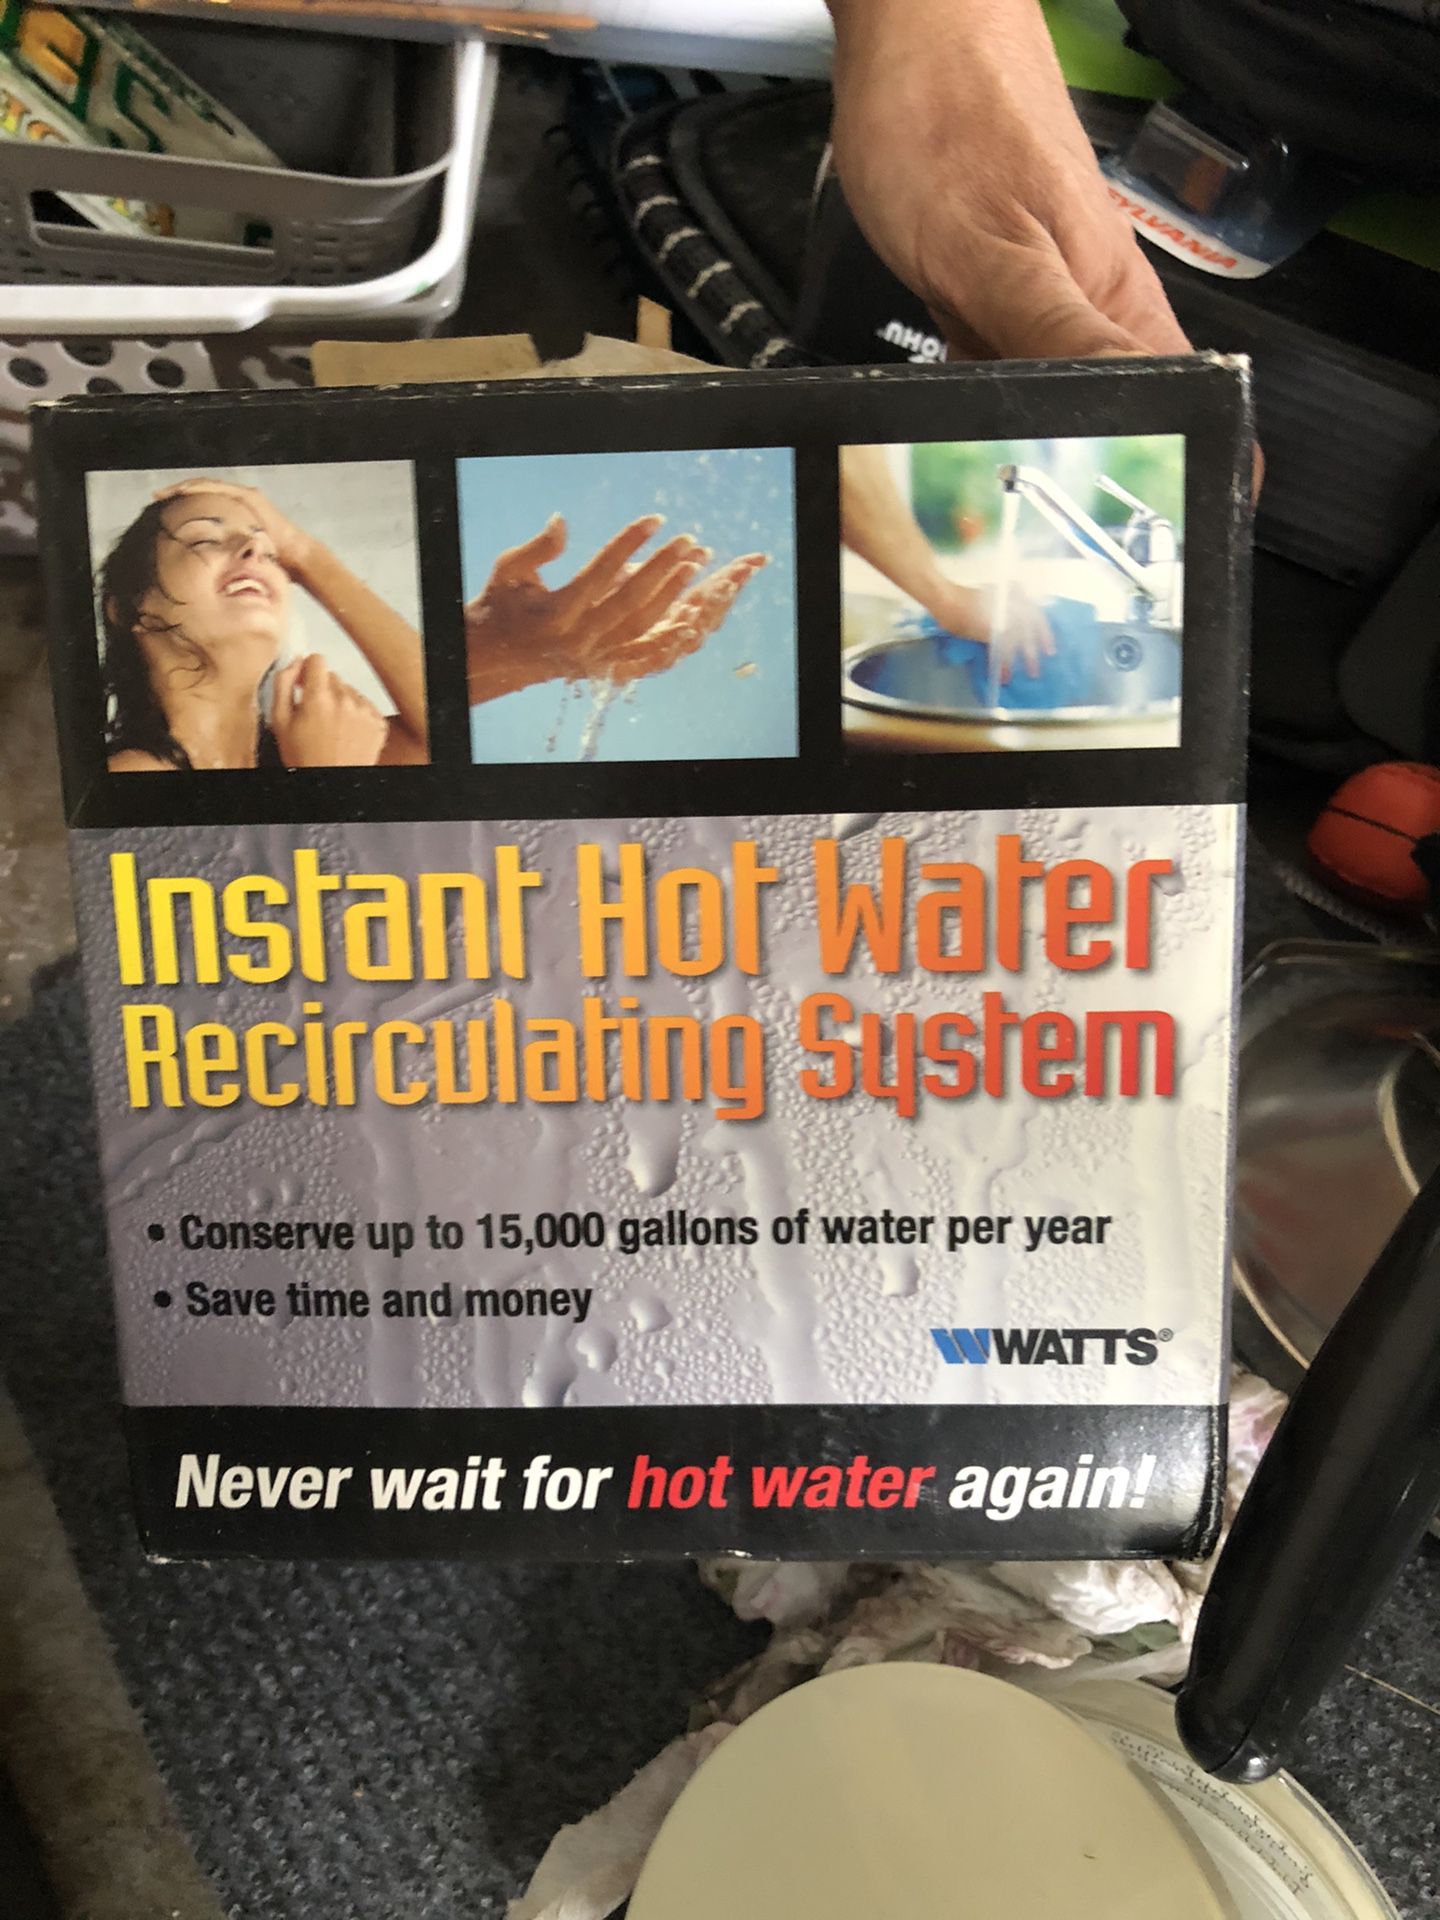 Instant hot water recirculating system